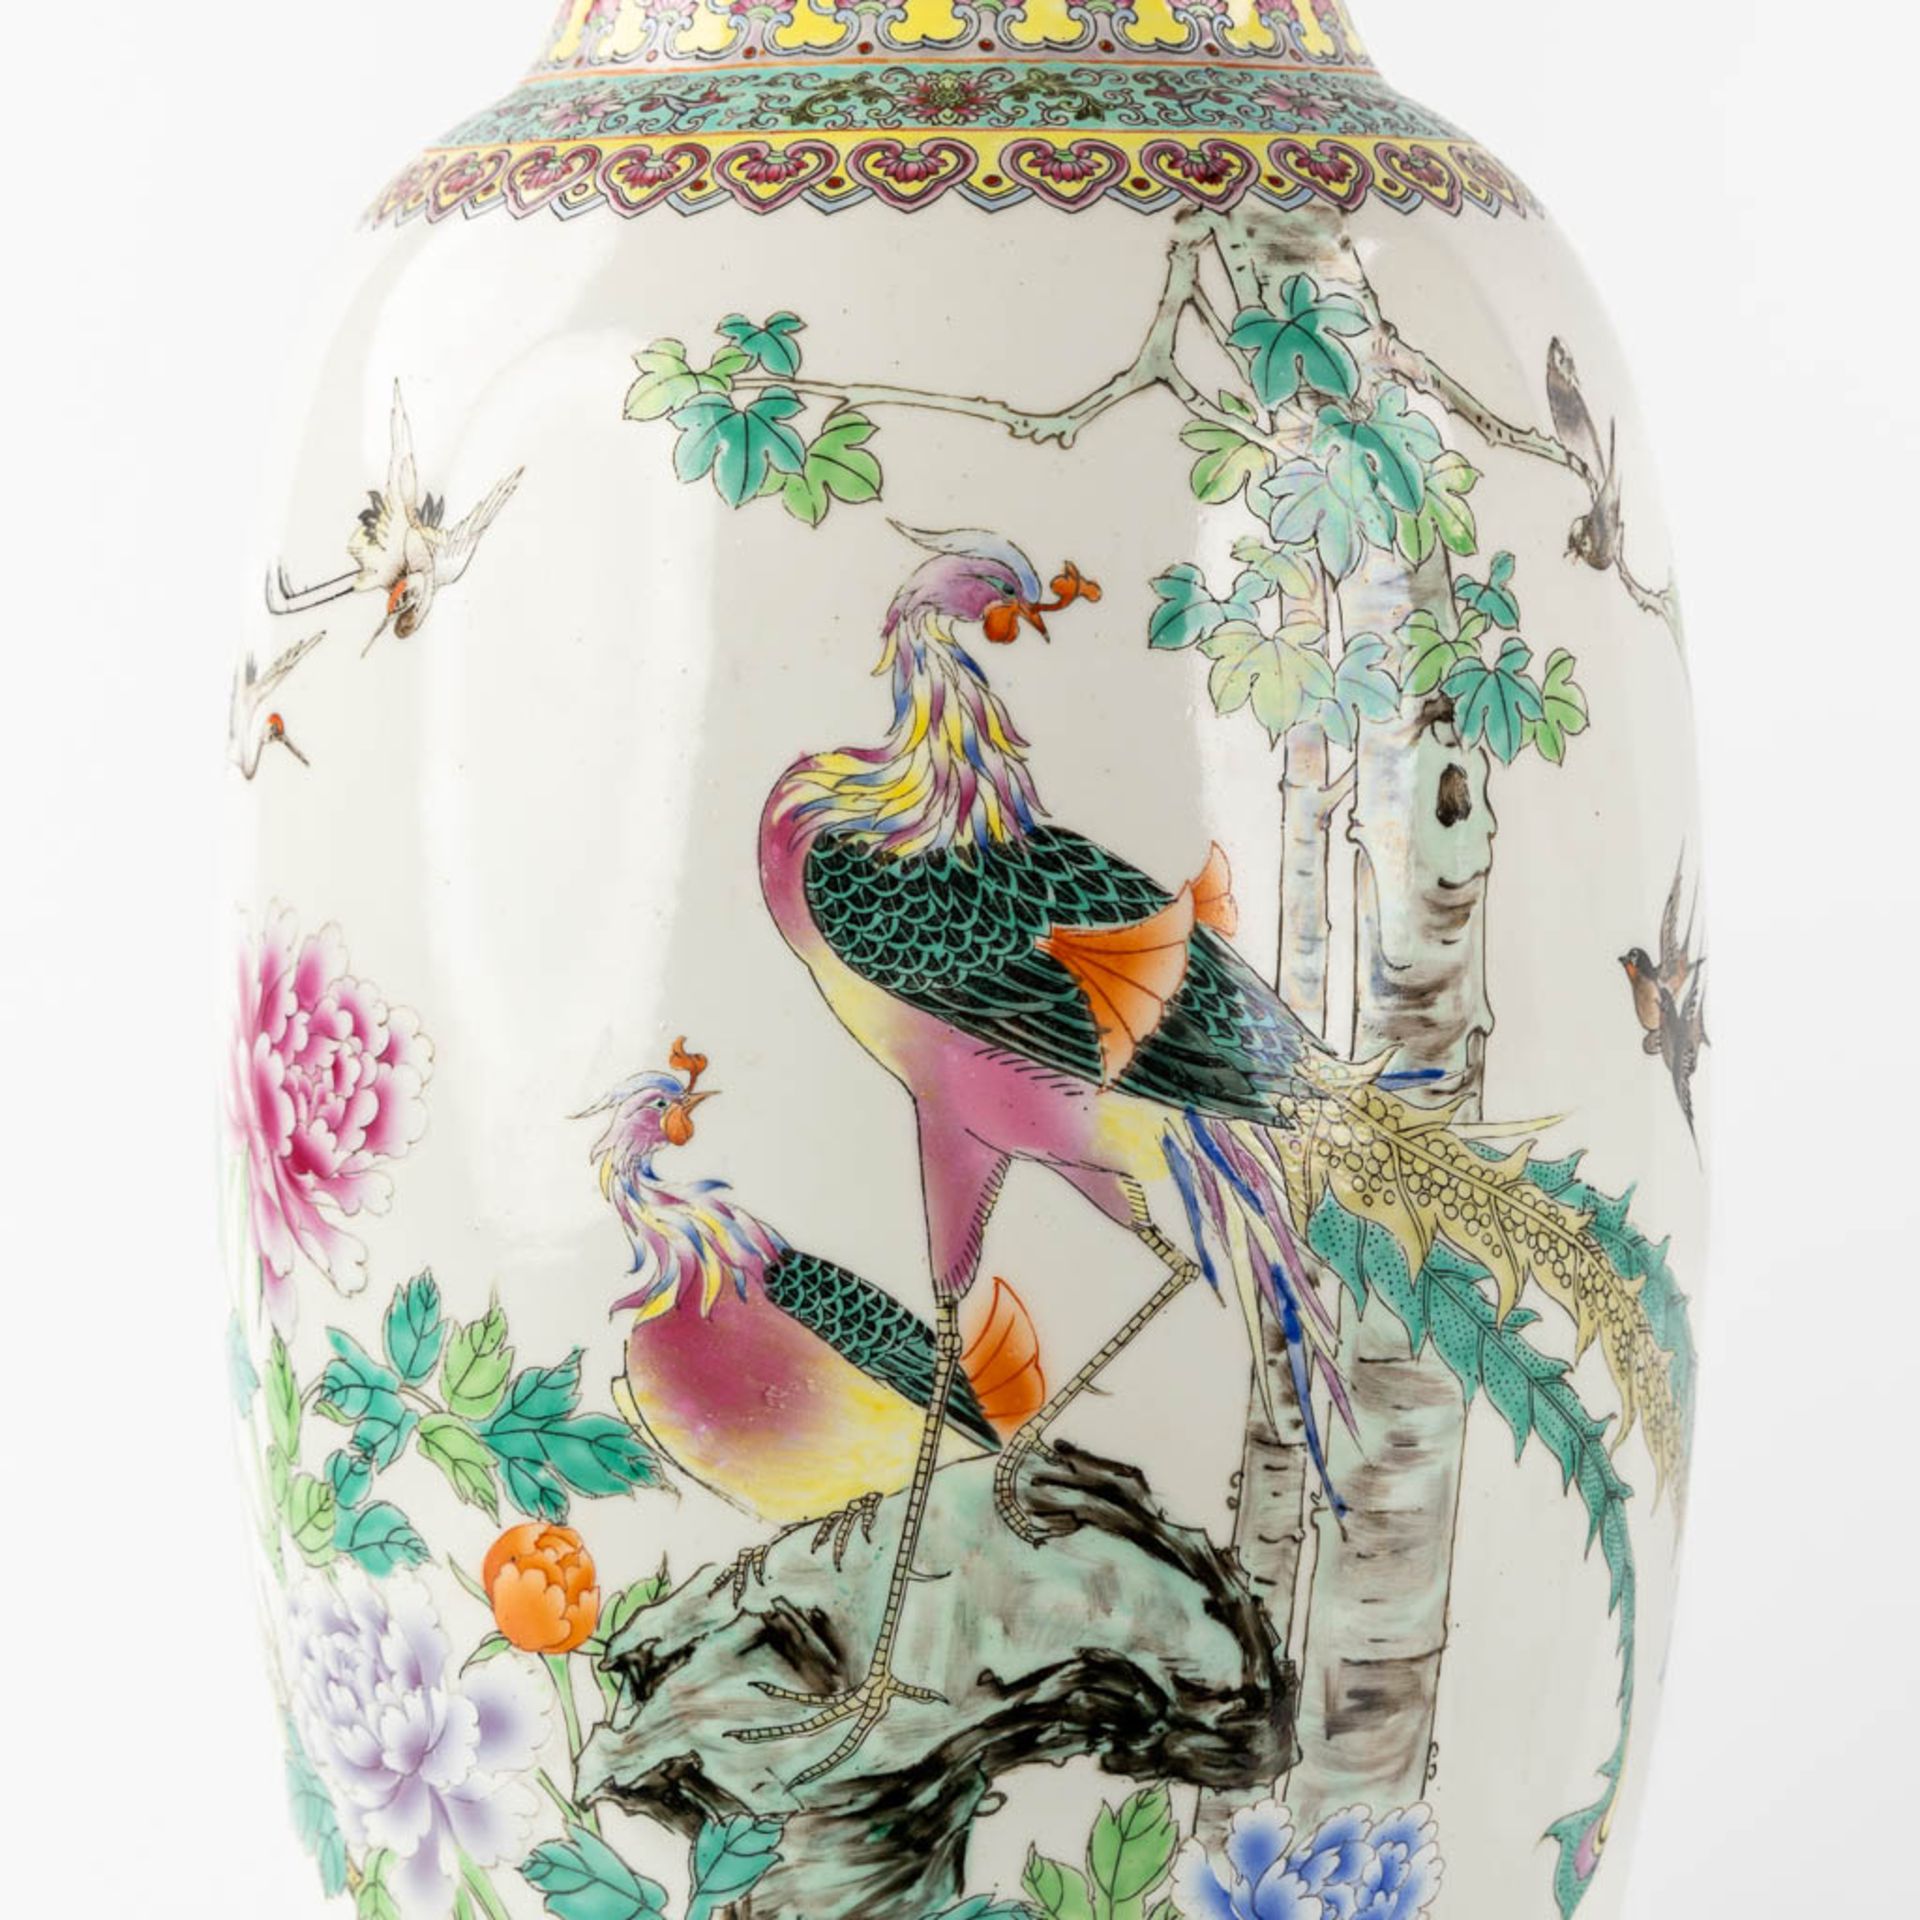 A decorative pair of Chinese vases with a Phoenix decor, 20th C. (H:62 x D:26 cm) - Image 12 of 16